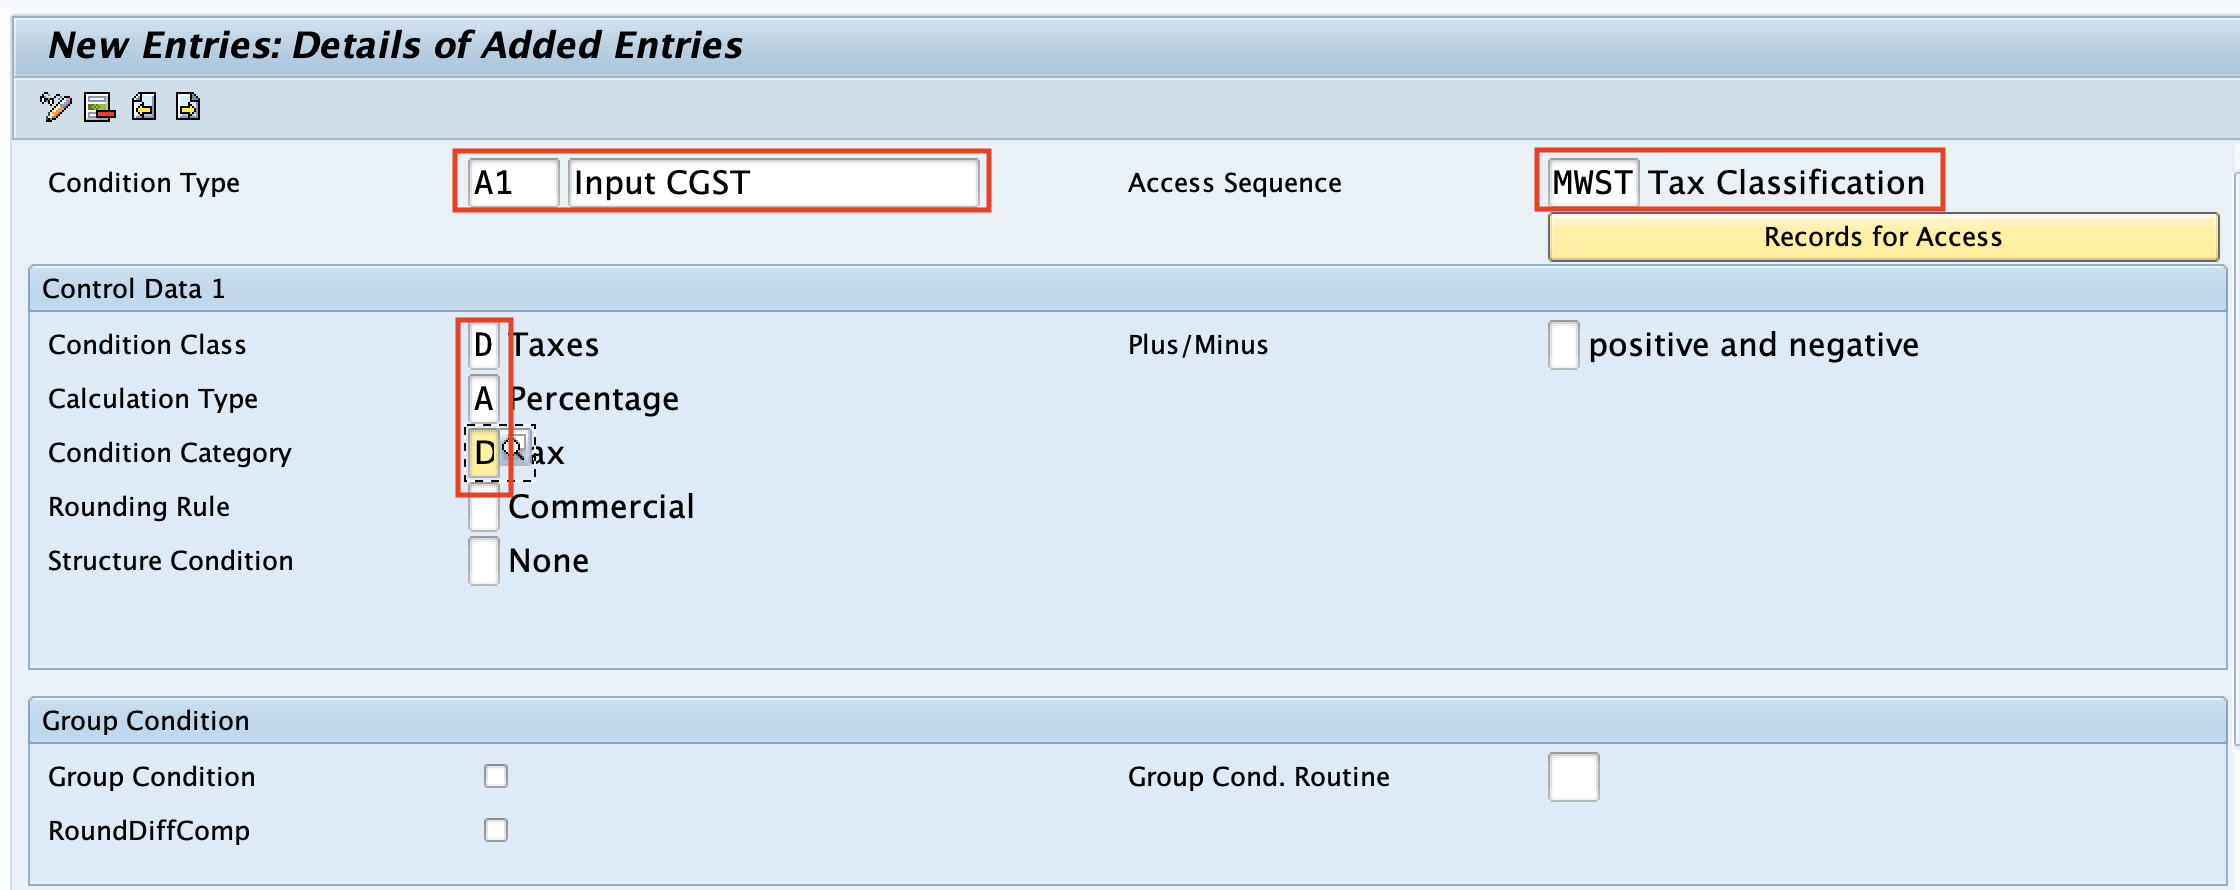 sap condition type account assignment